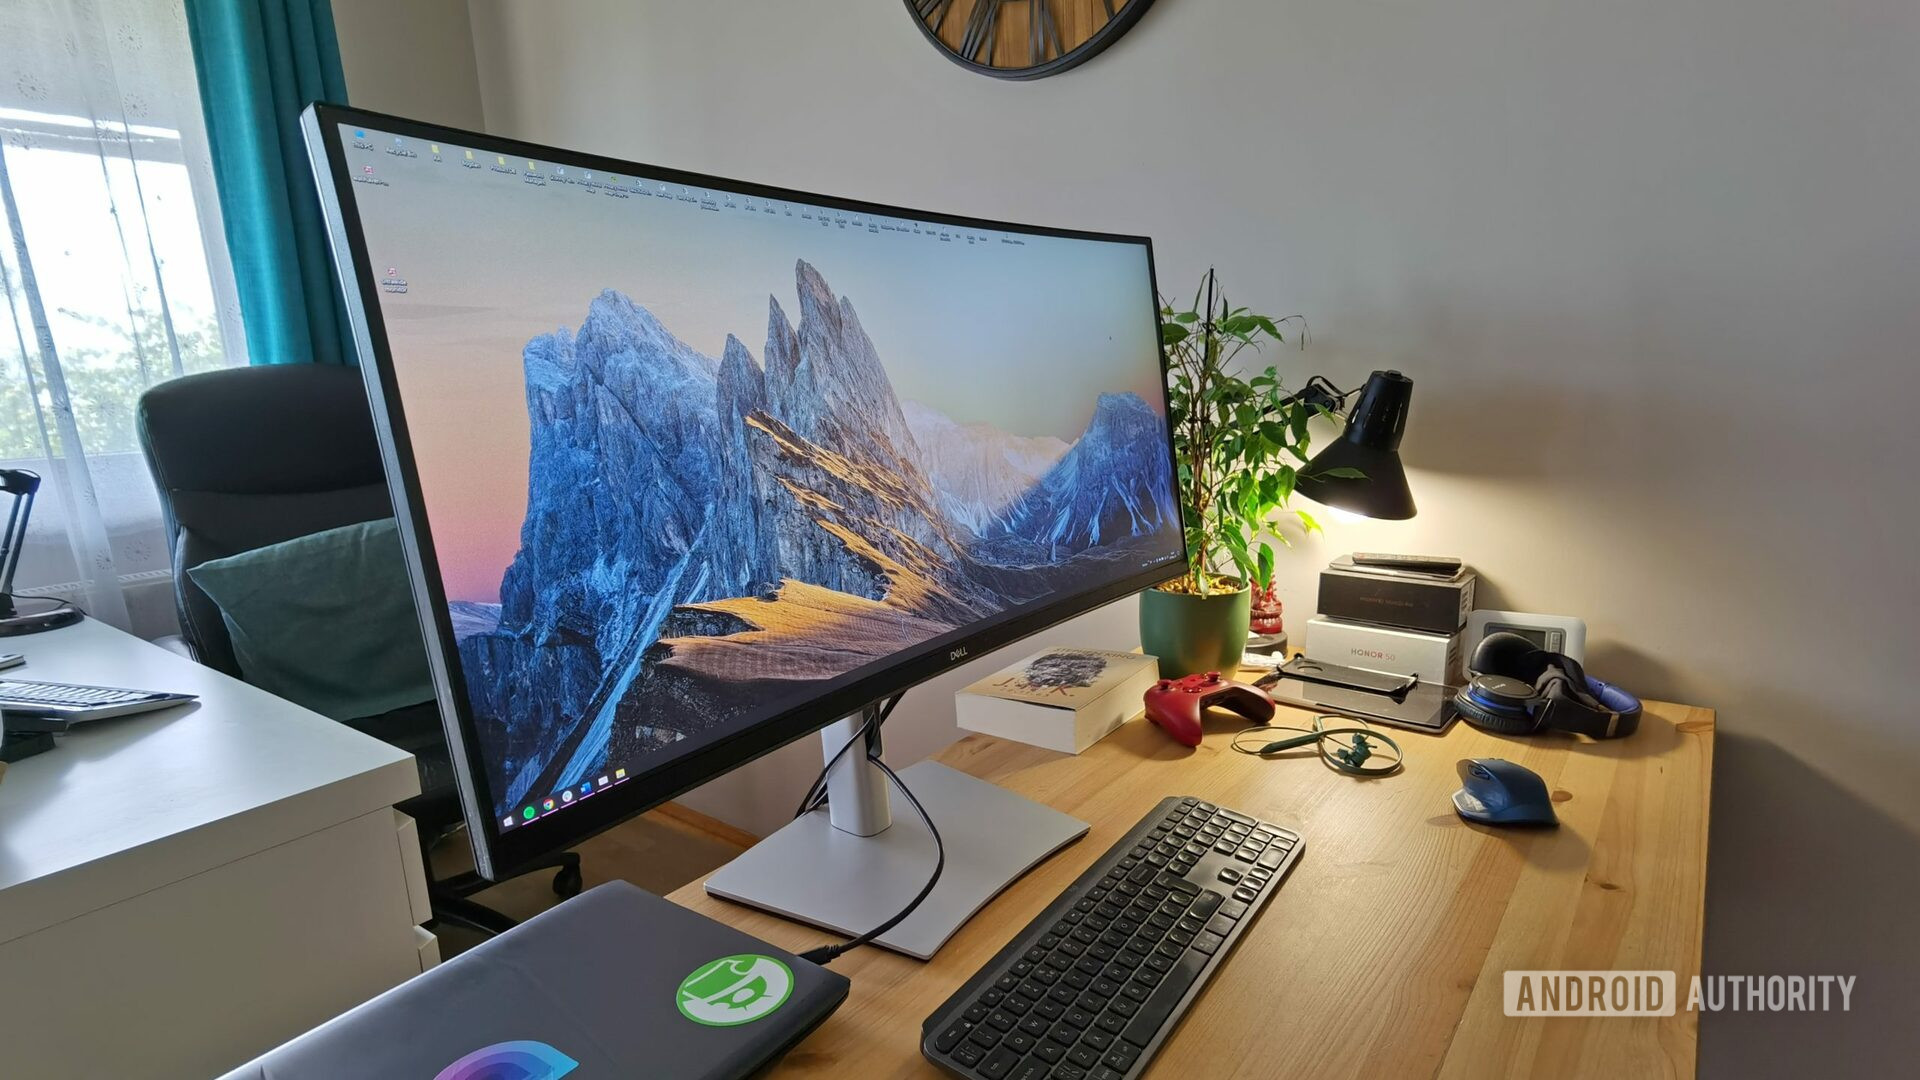 Dell P3421W ultrawide monitor on a desk with keyboard, light, and other desk accessories.